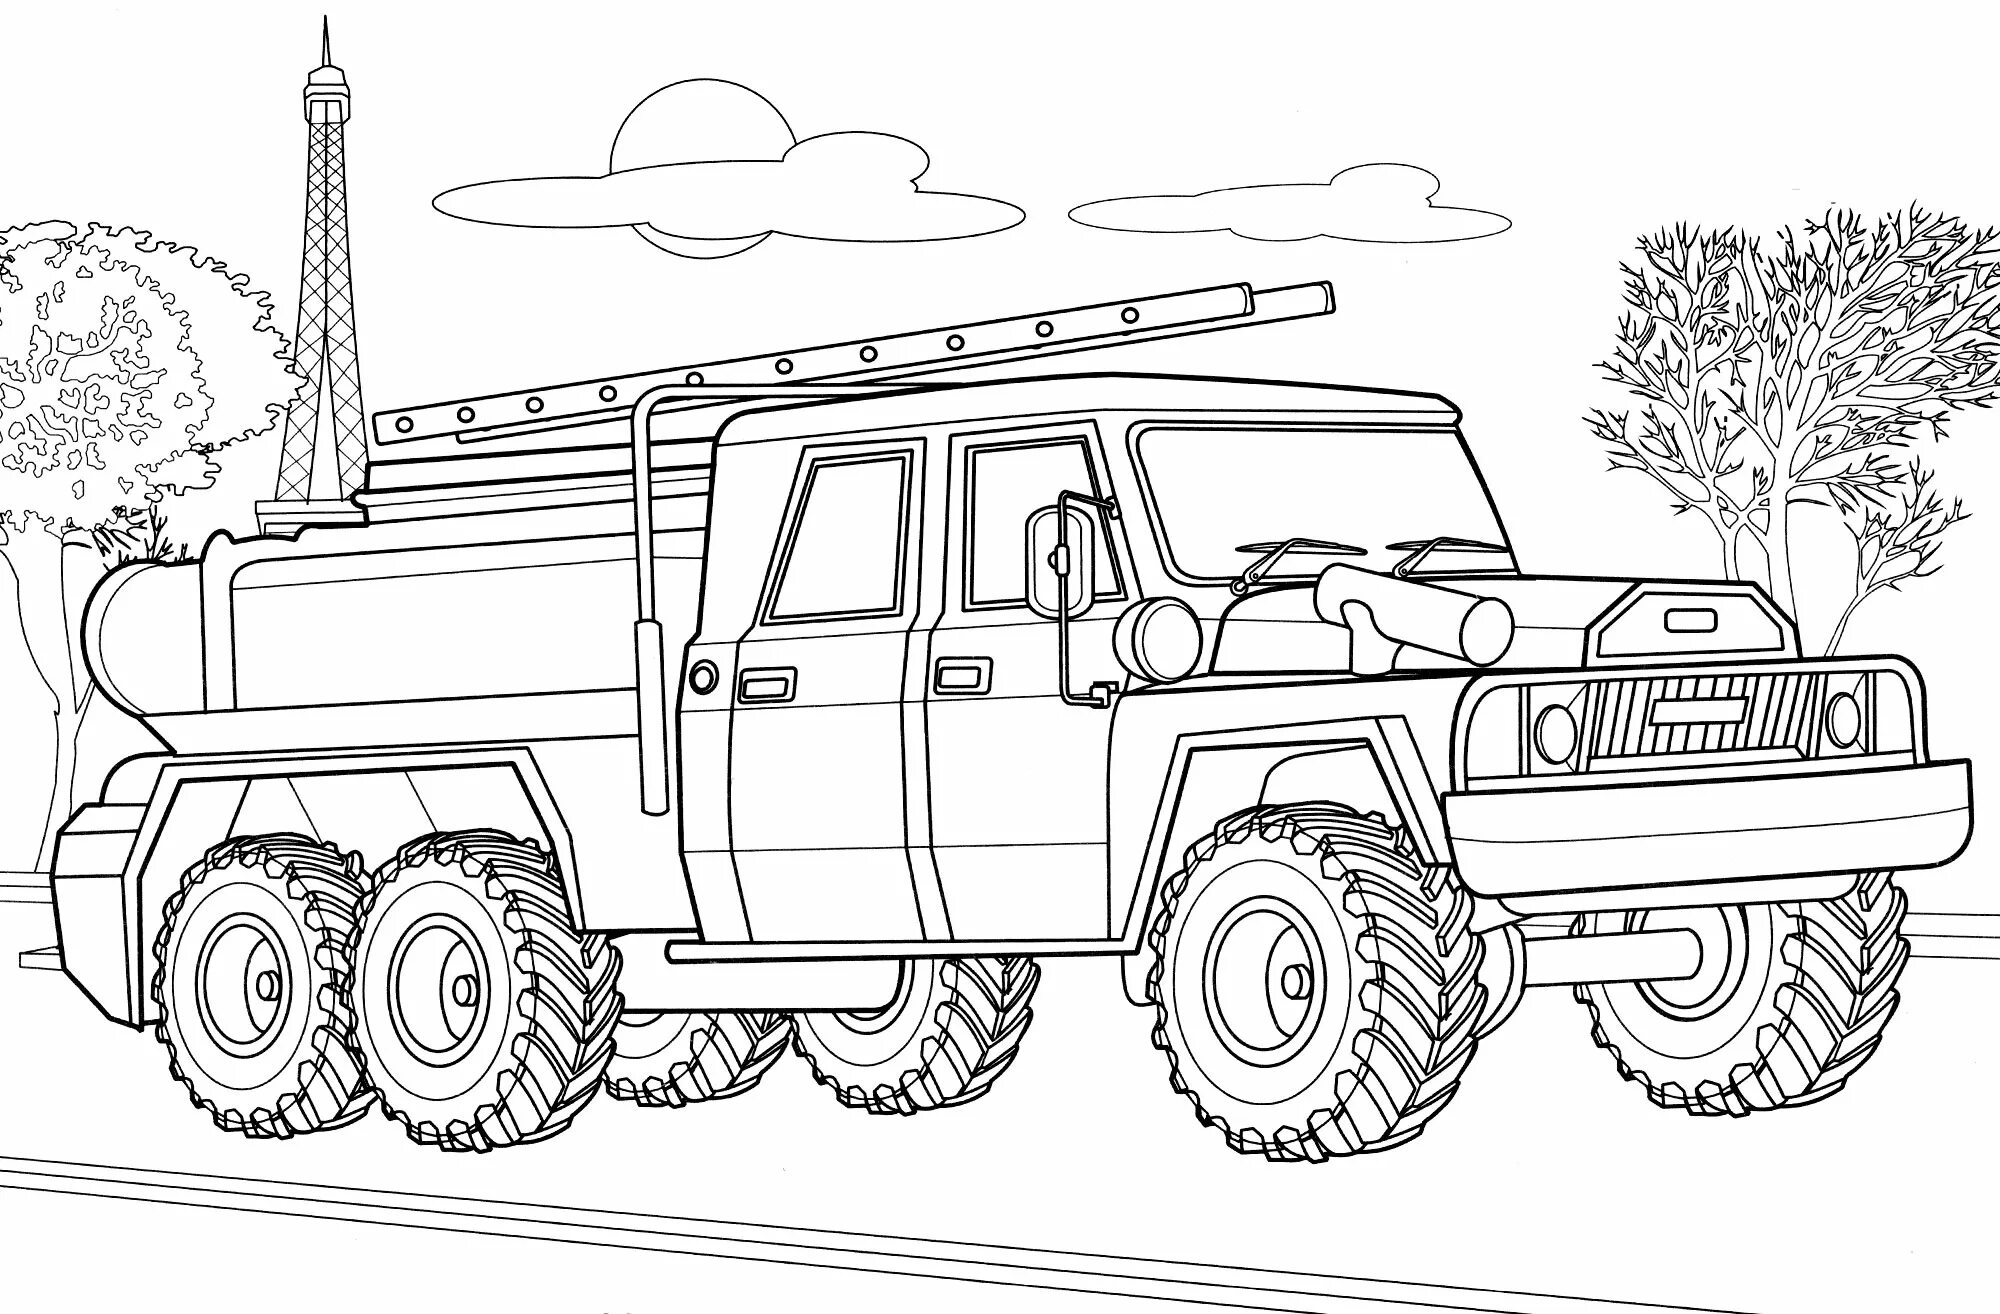 Coloring page extraordinary firefighting equipment